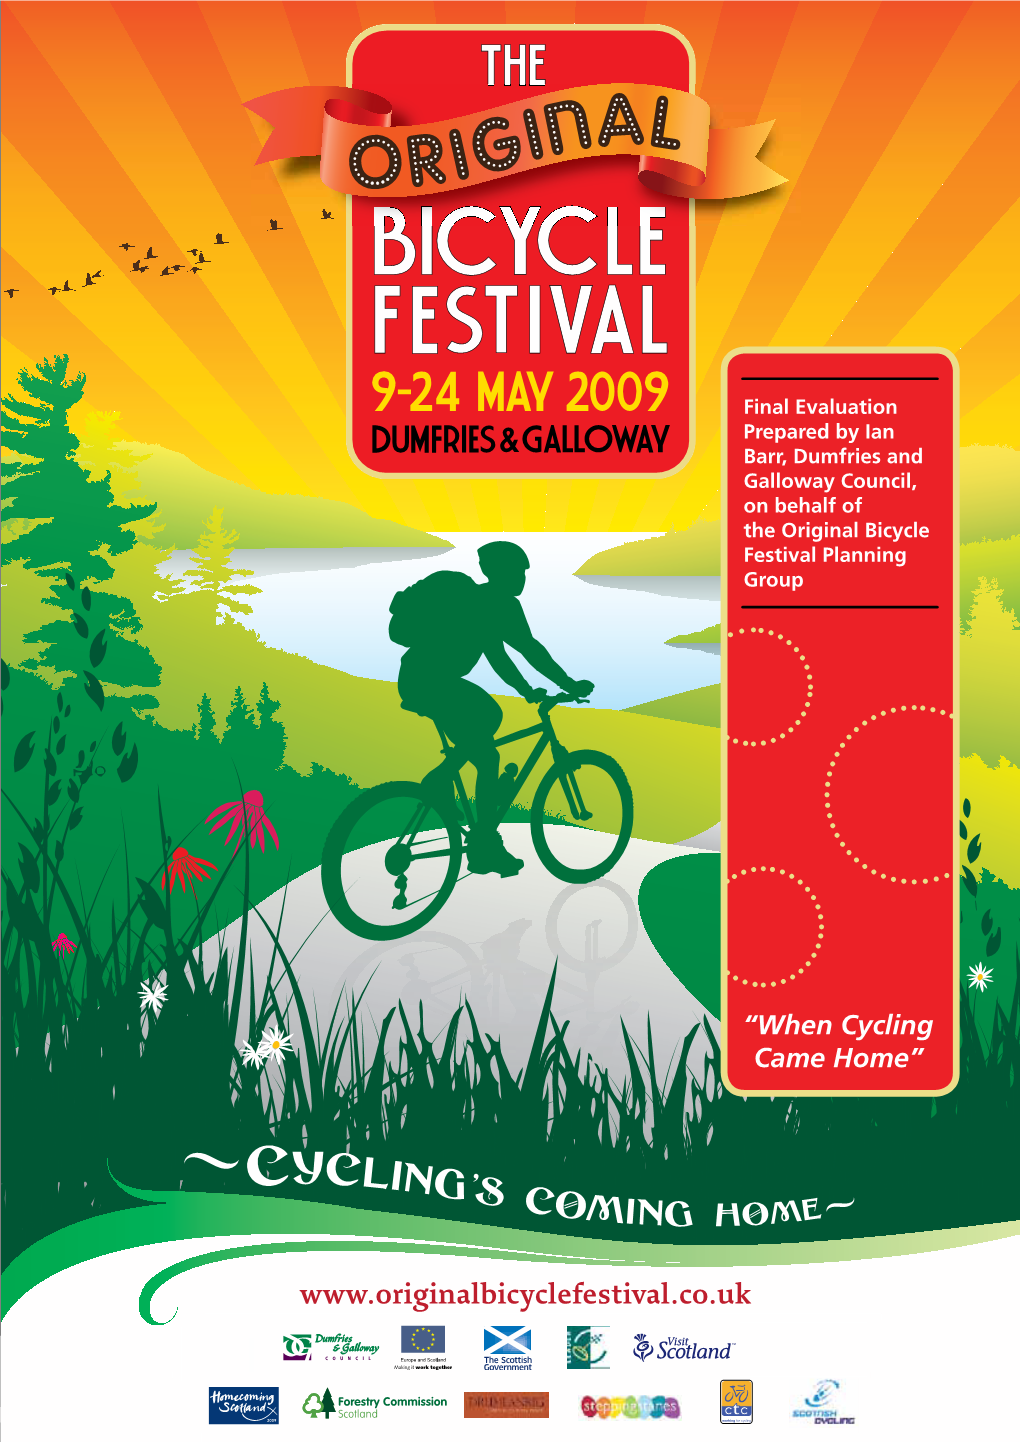 Original Bicycle Festival Planning Group